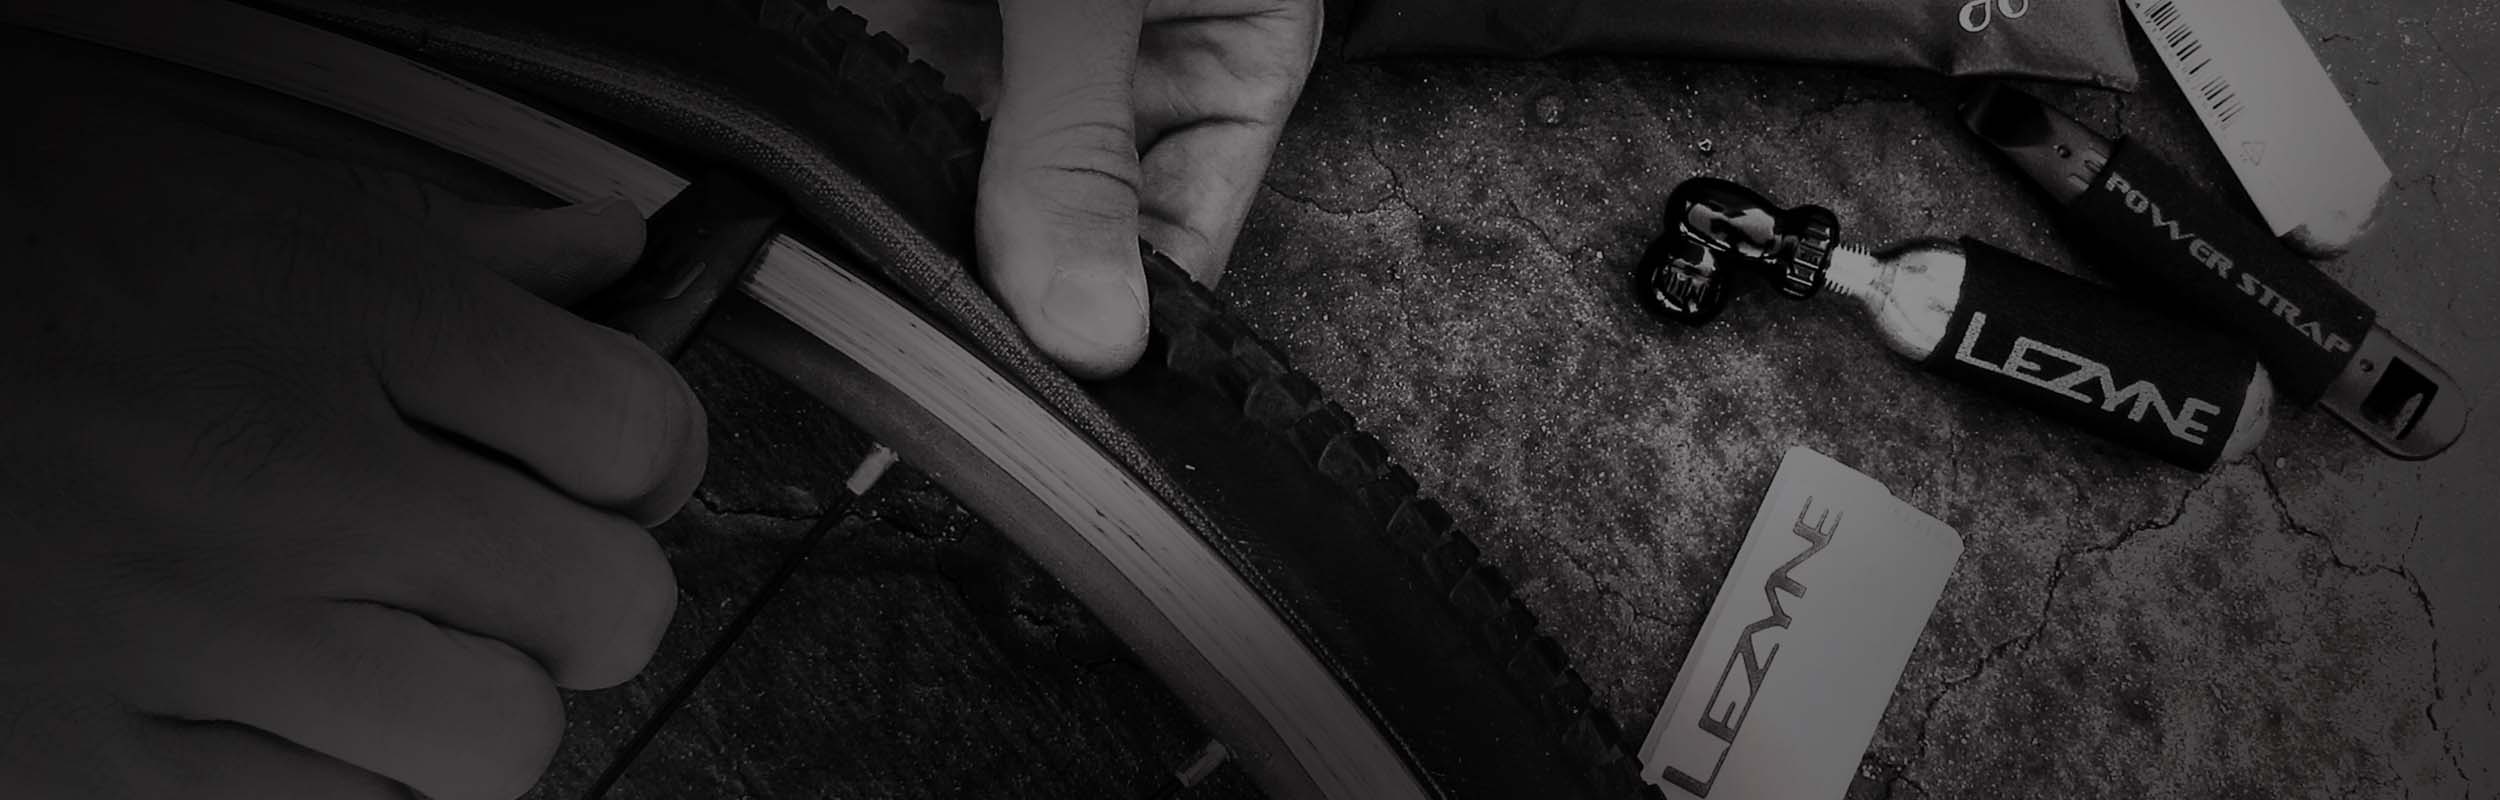 Someone using a tool to remove a bicycle tire from a rim.